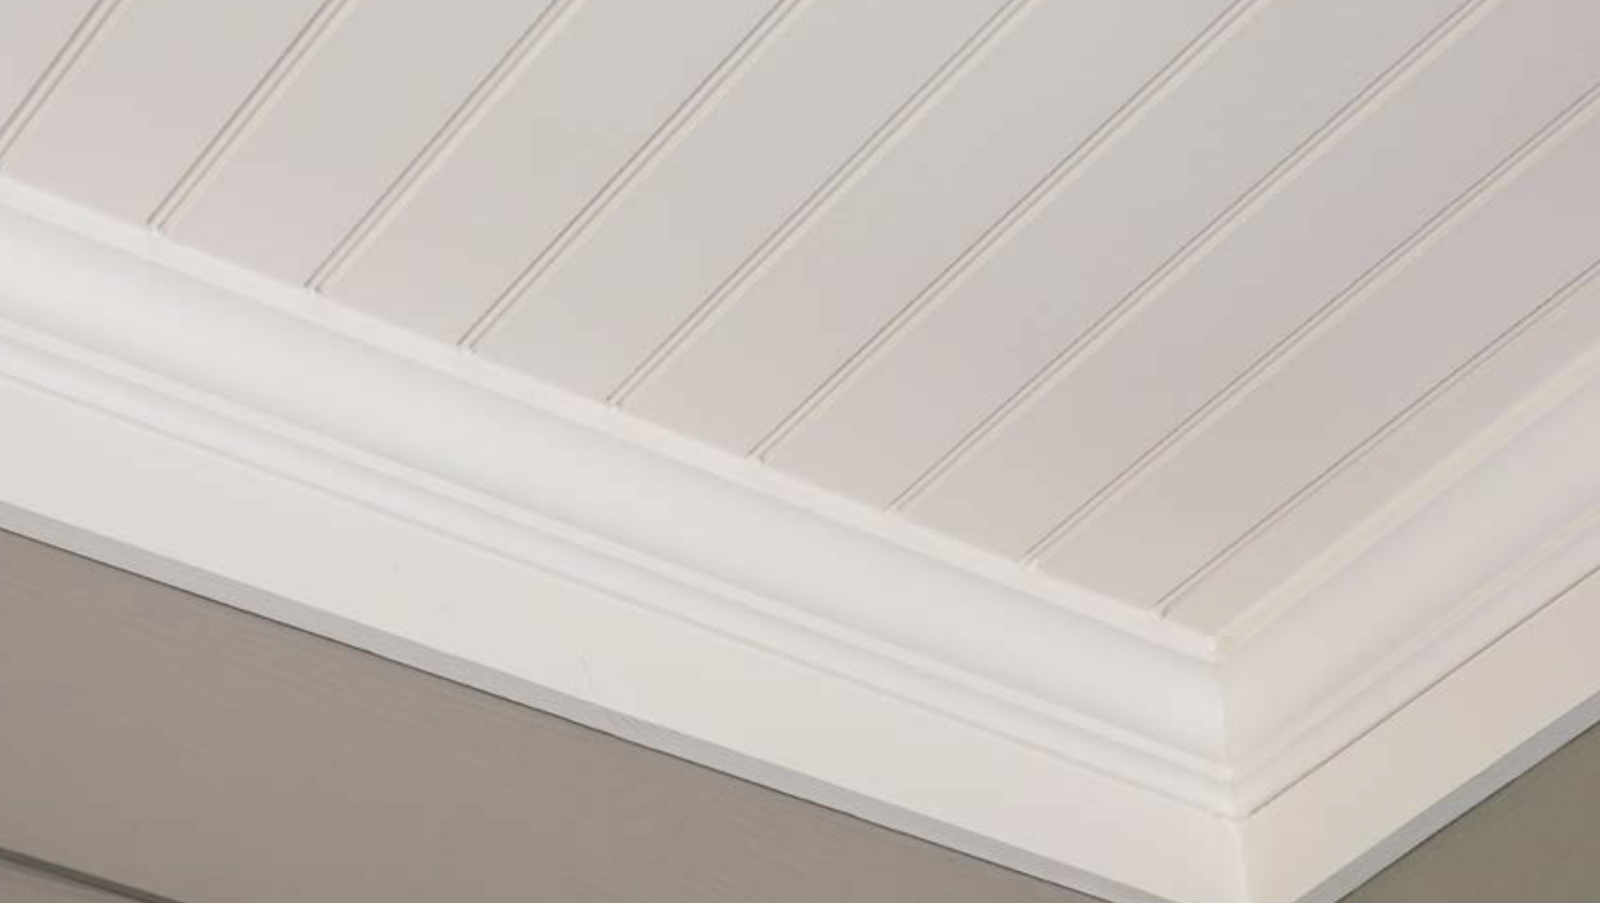 Moisture resistant outdoor ceiling material 1